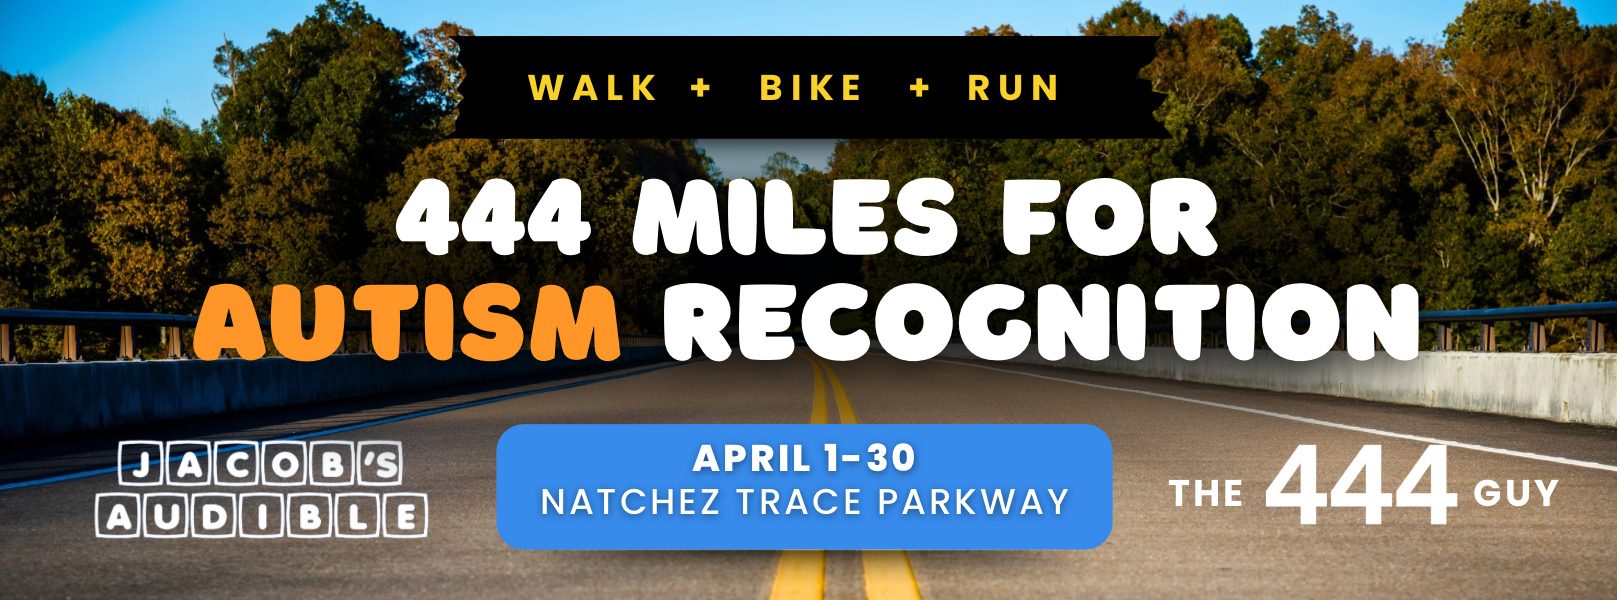 444 Virtual Miles for Autism Recognition